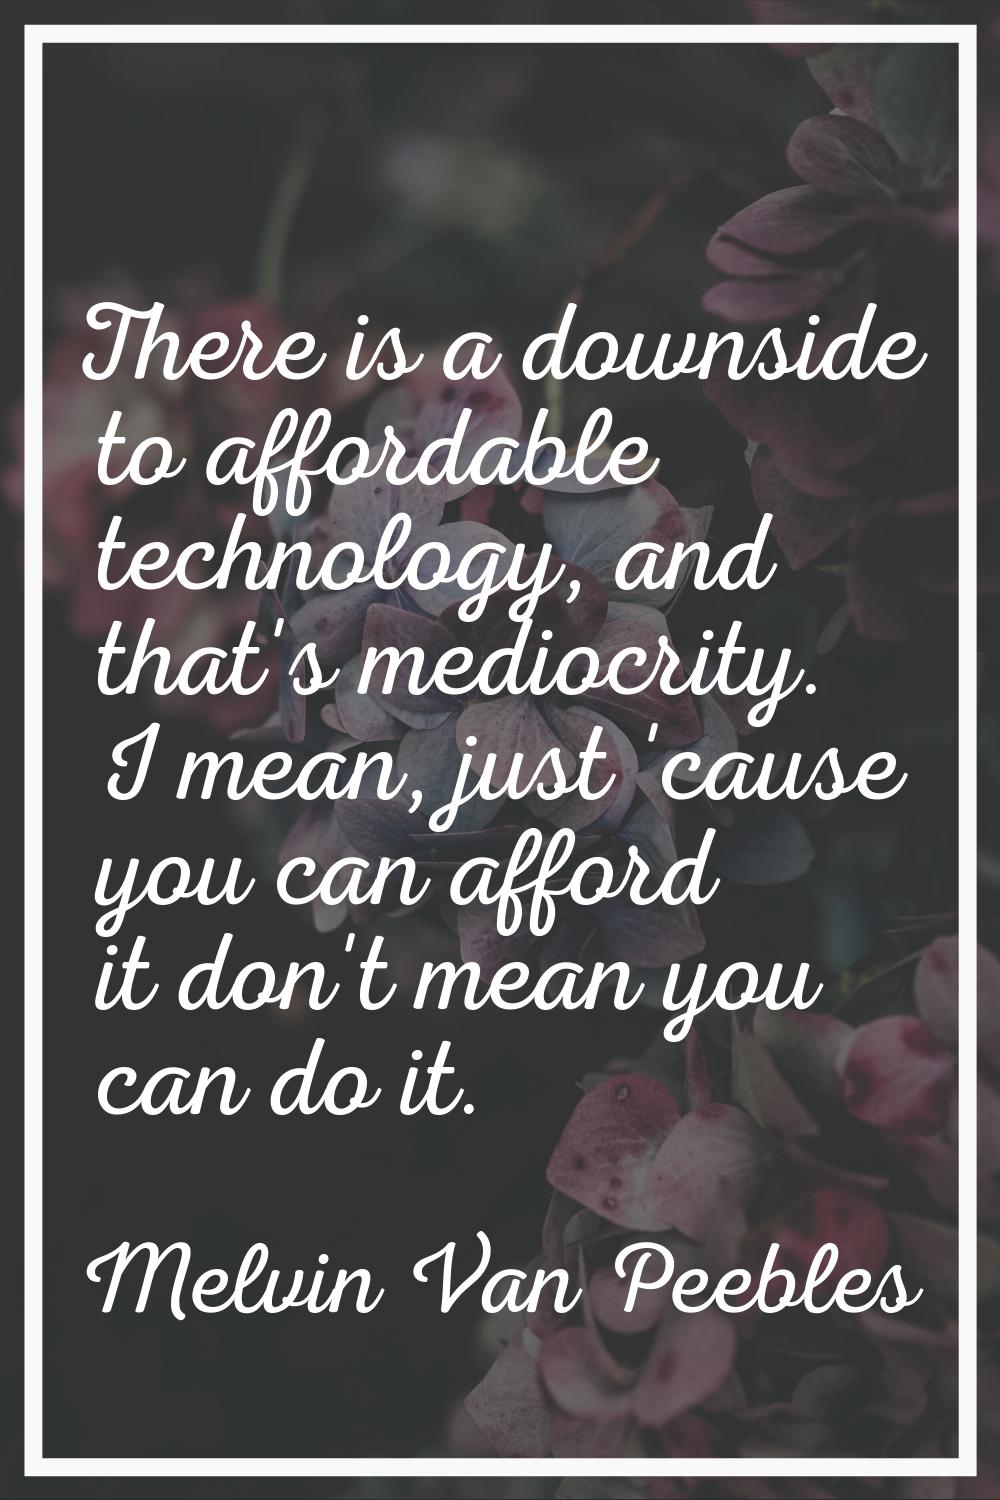 There is a downside to affordable technology, and that's mediocrity. I mean, just 'cause you can af